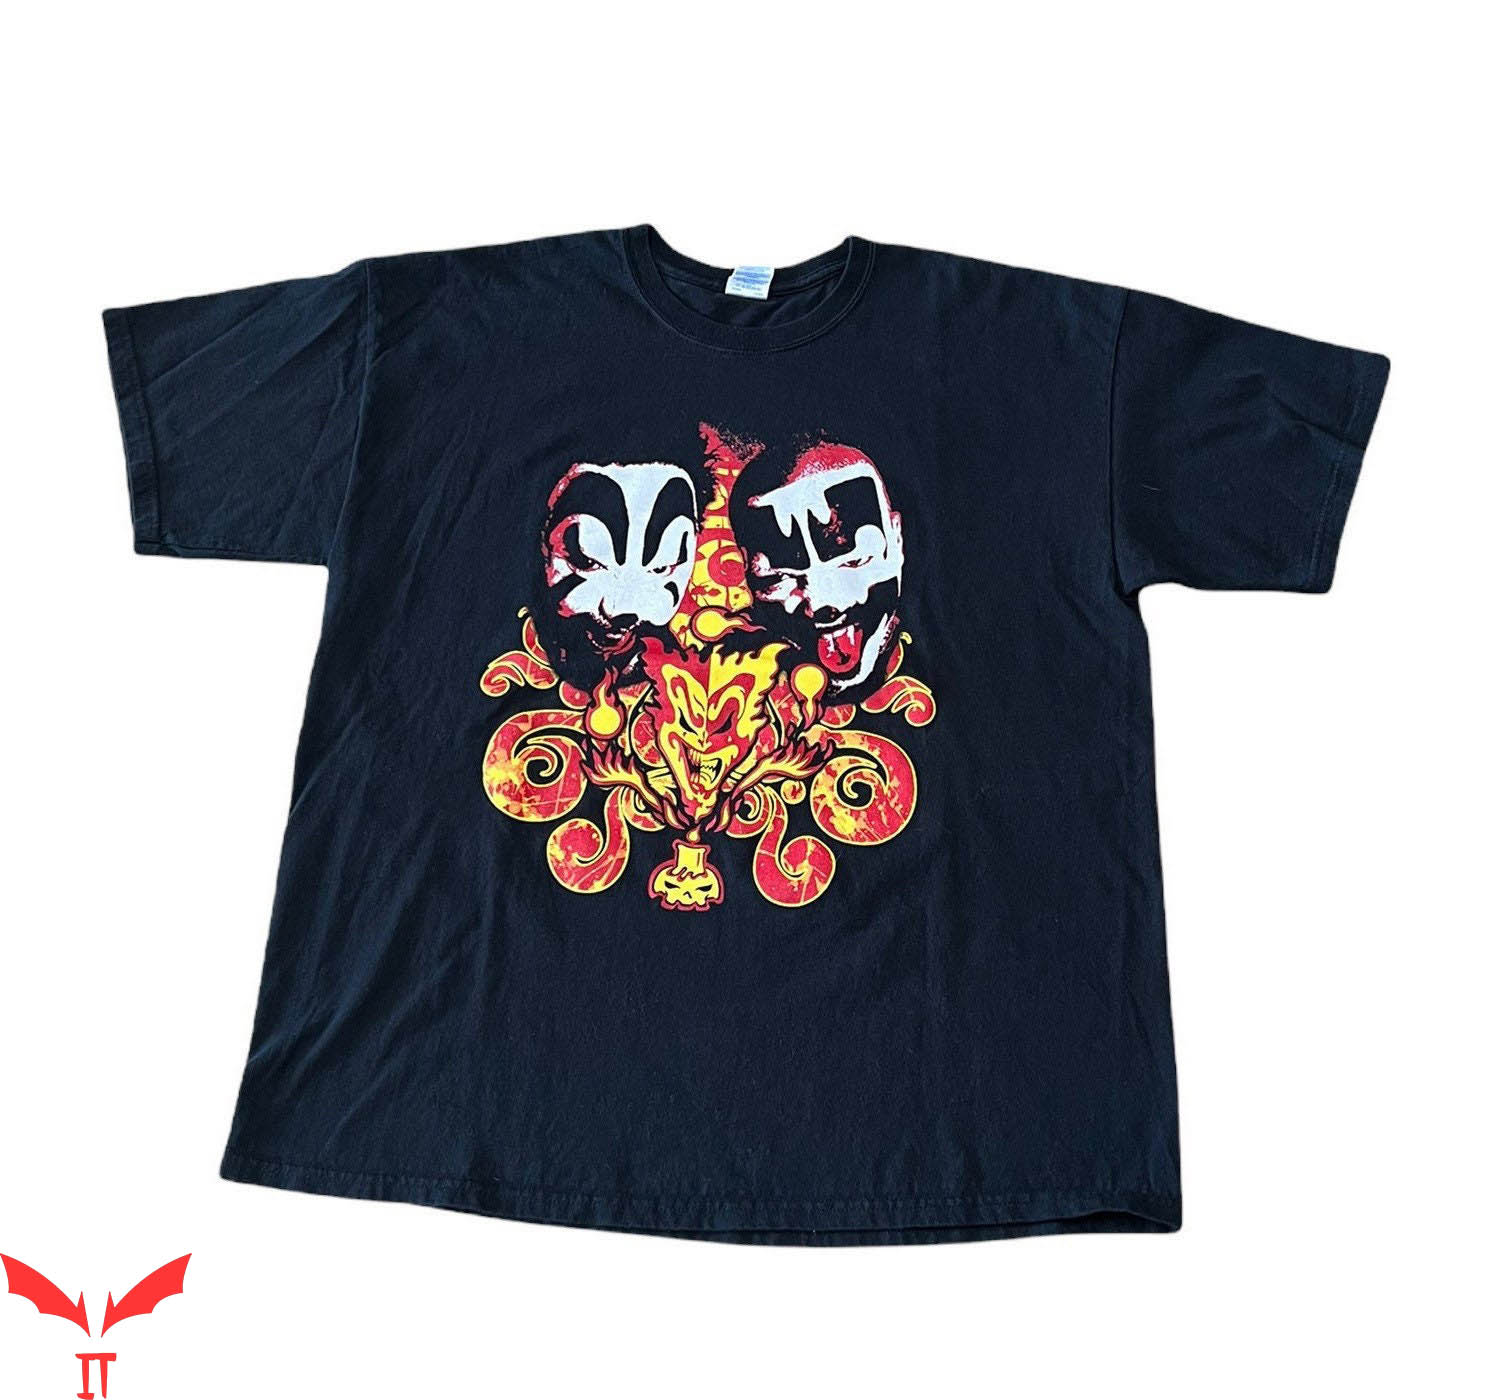 IT The Clown T-Shirt 1999 ICP Amazing Jeckel Brothers